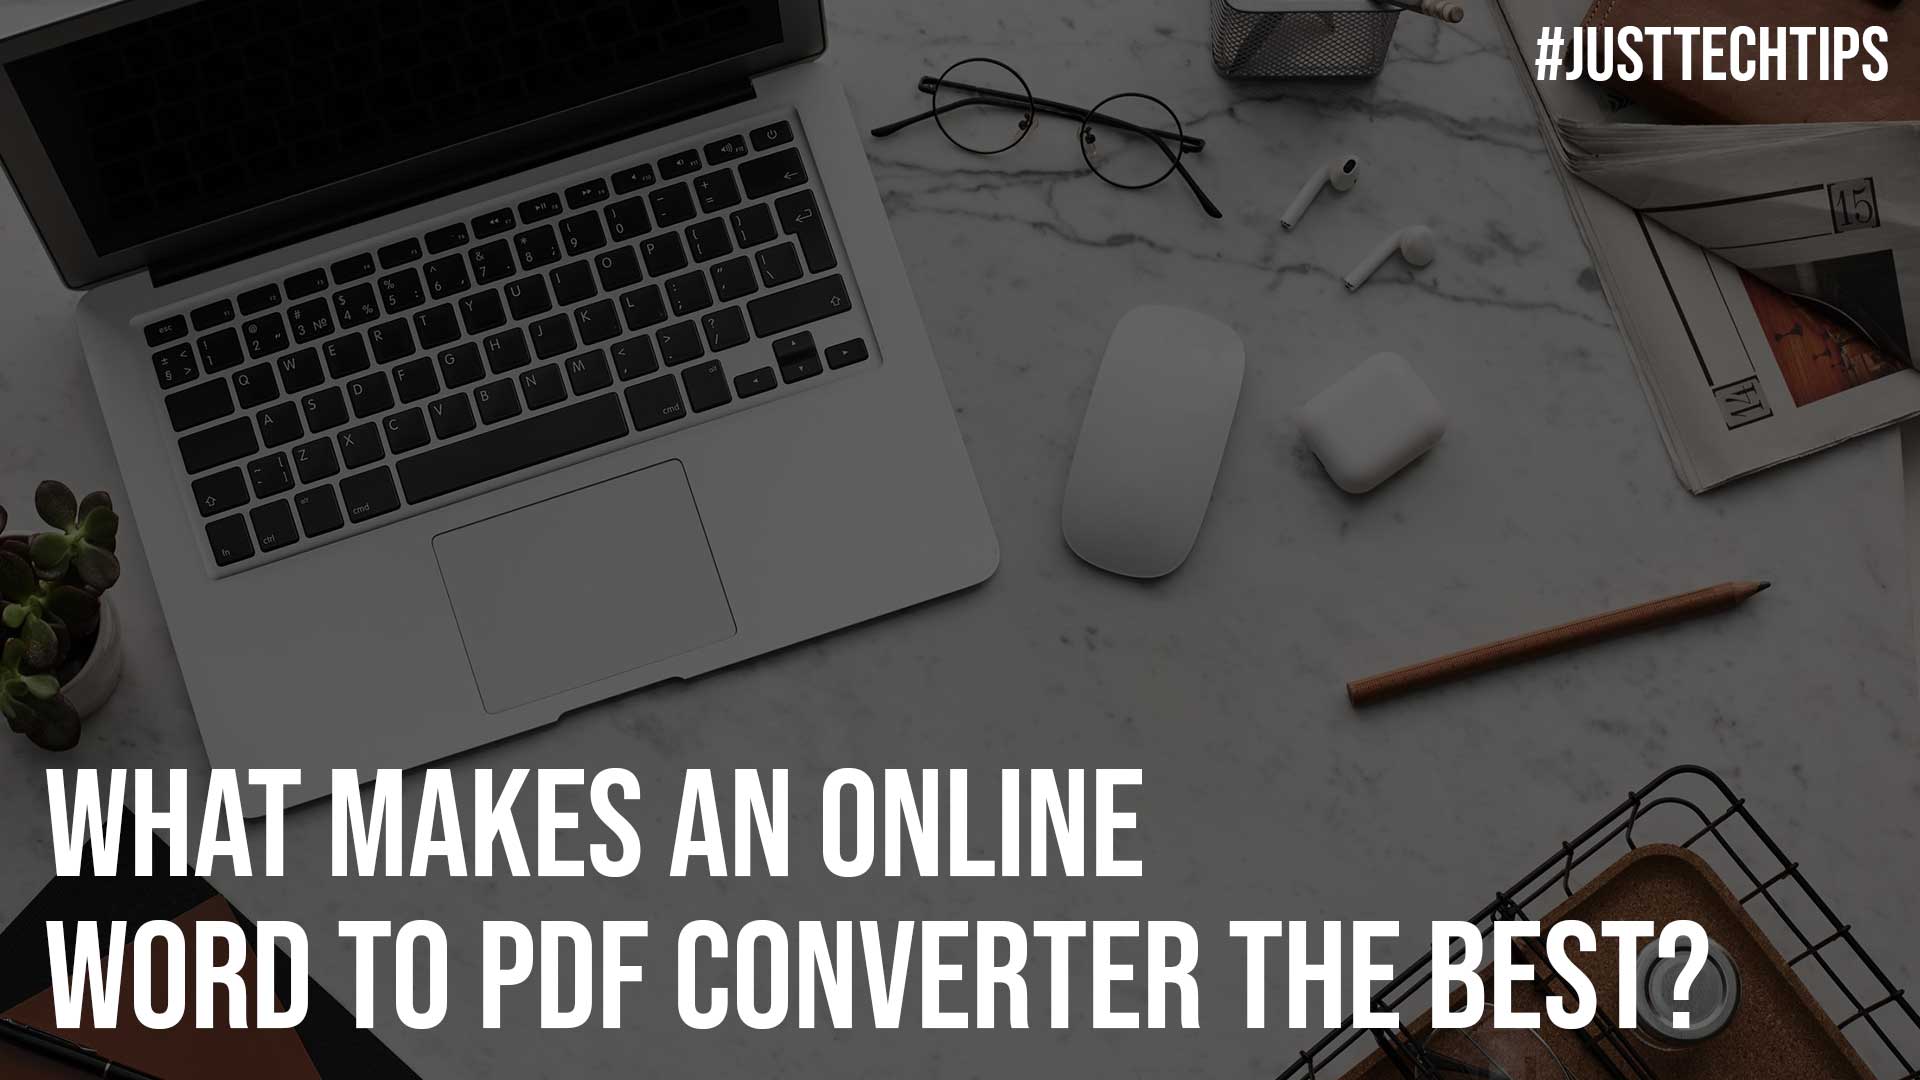 What Makes An Online Word To PDF Converter The Best